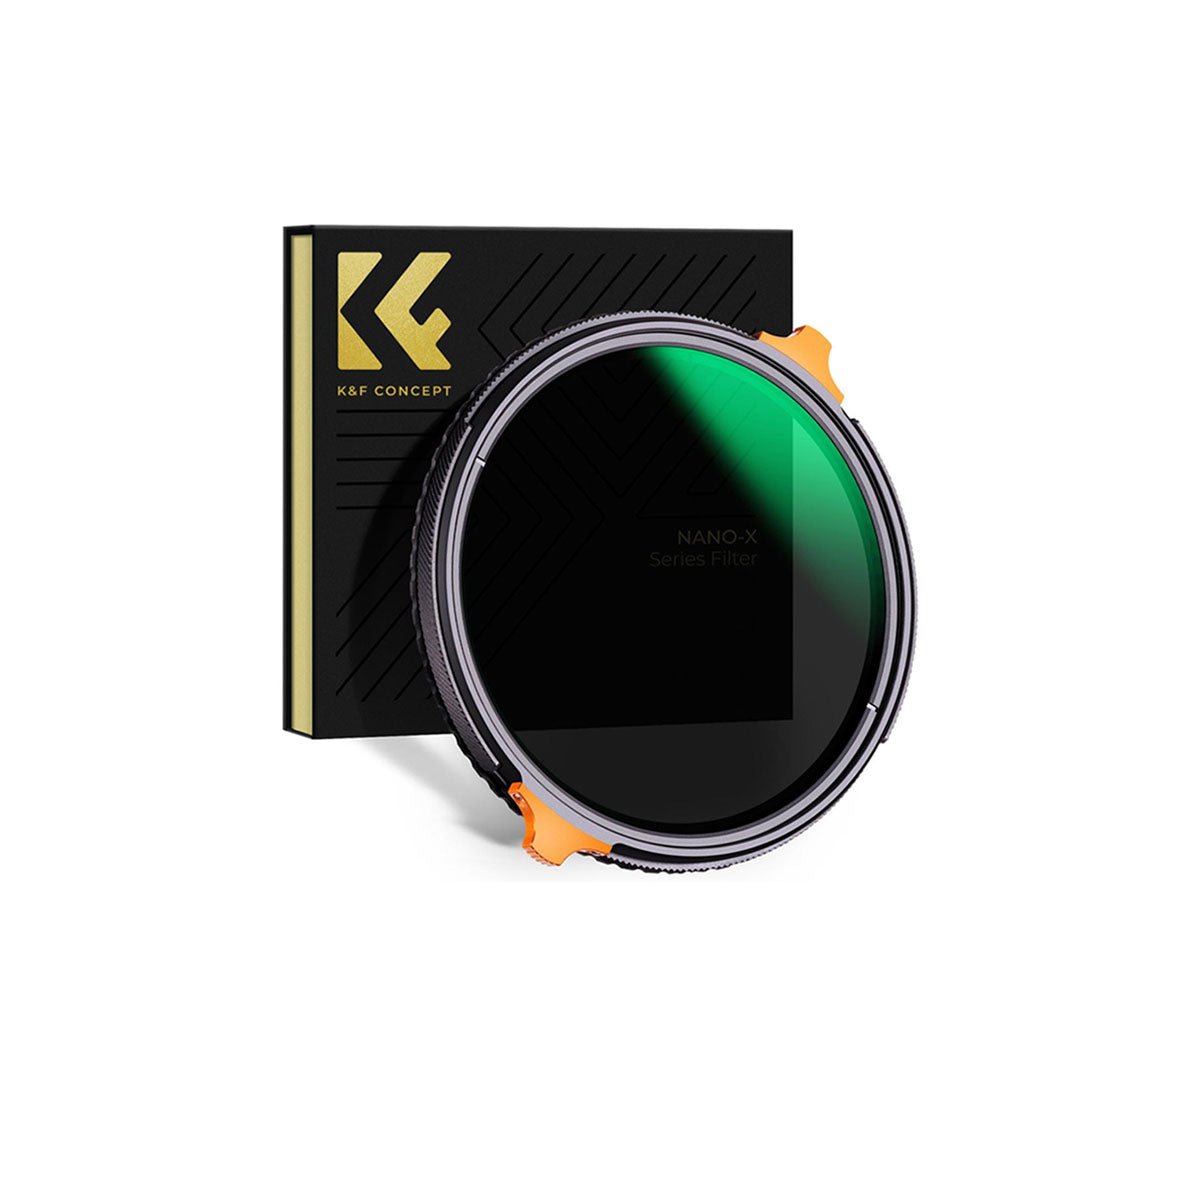 K&F Concept Nano X Series 1/4 Neutral Density ND4 to ND64 Variable CPL 2 in 1 ND Filter With Two Orange Levers for DSLR and Mirrorless Cameras | 49mm, 52mm, 55mm, 58mm, 62mm, 67mm, 72mm, 77mm, 82mm